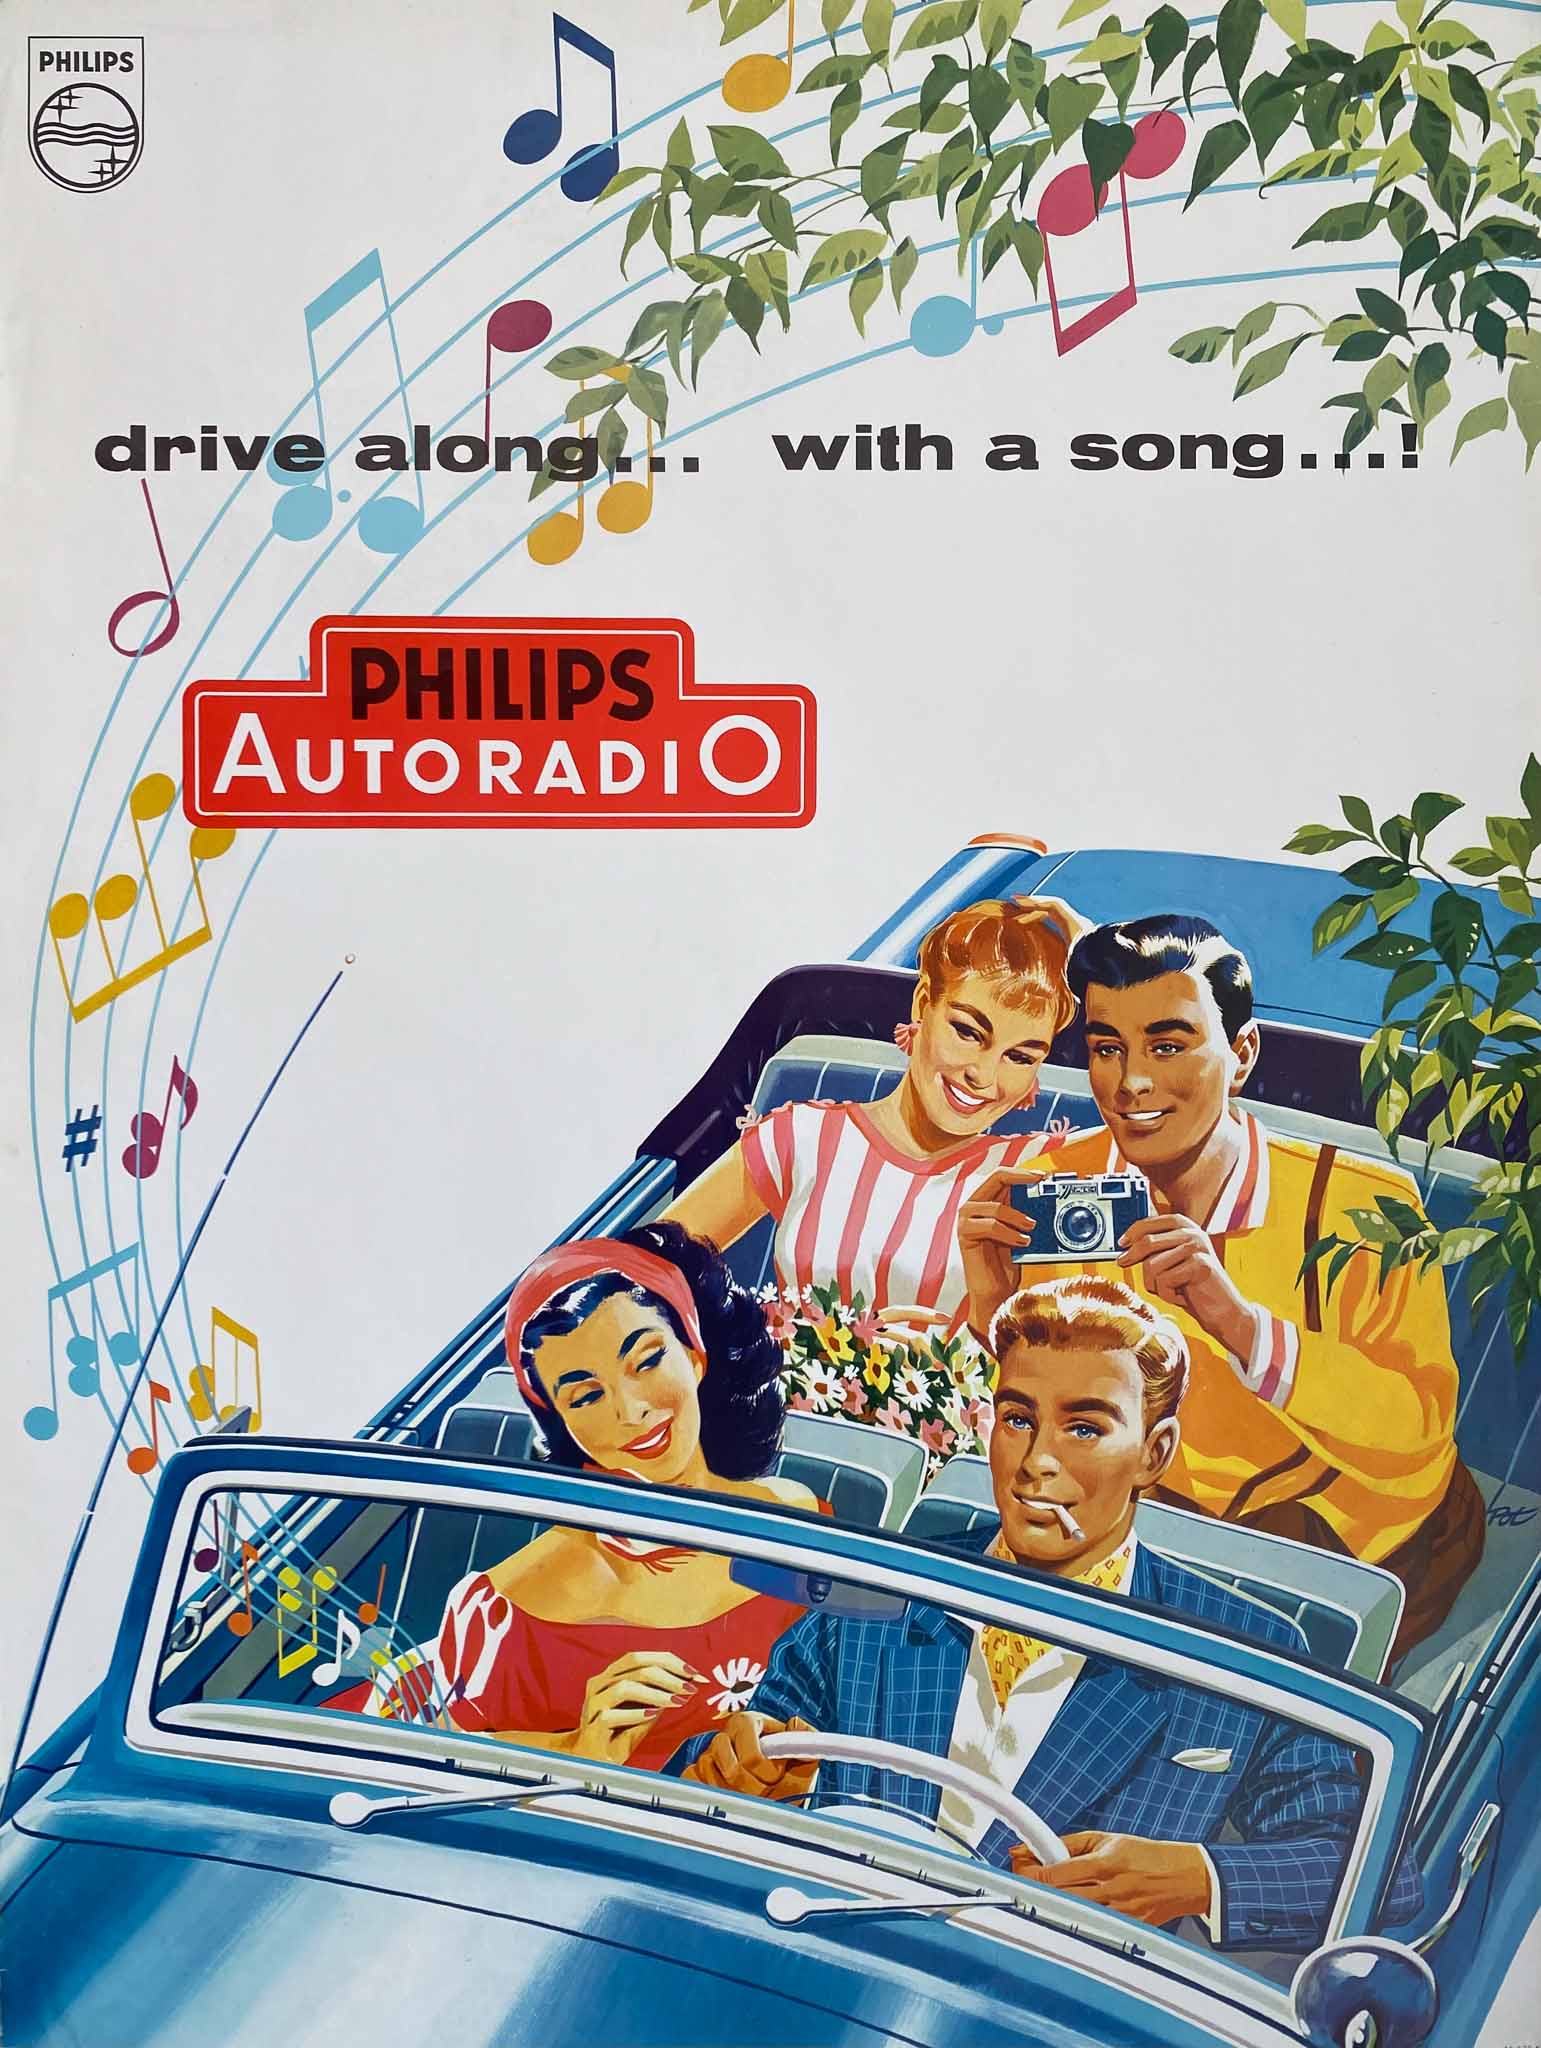 Affiche Philips Autoradio drive along... with a song… par pot Willy, 1960